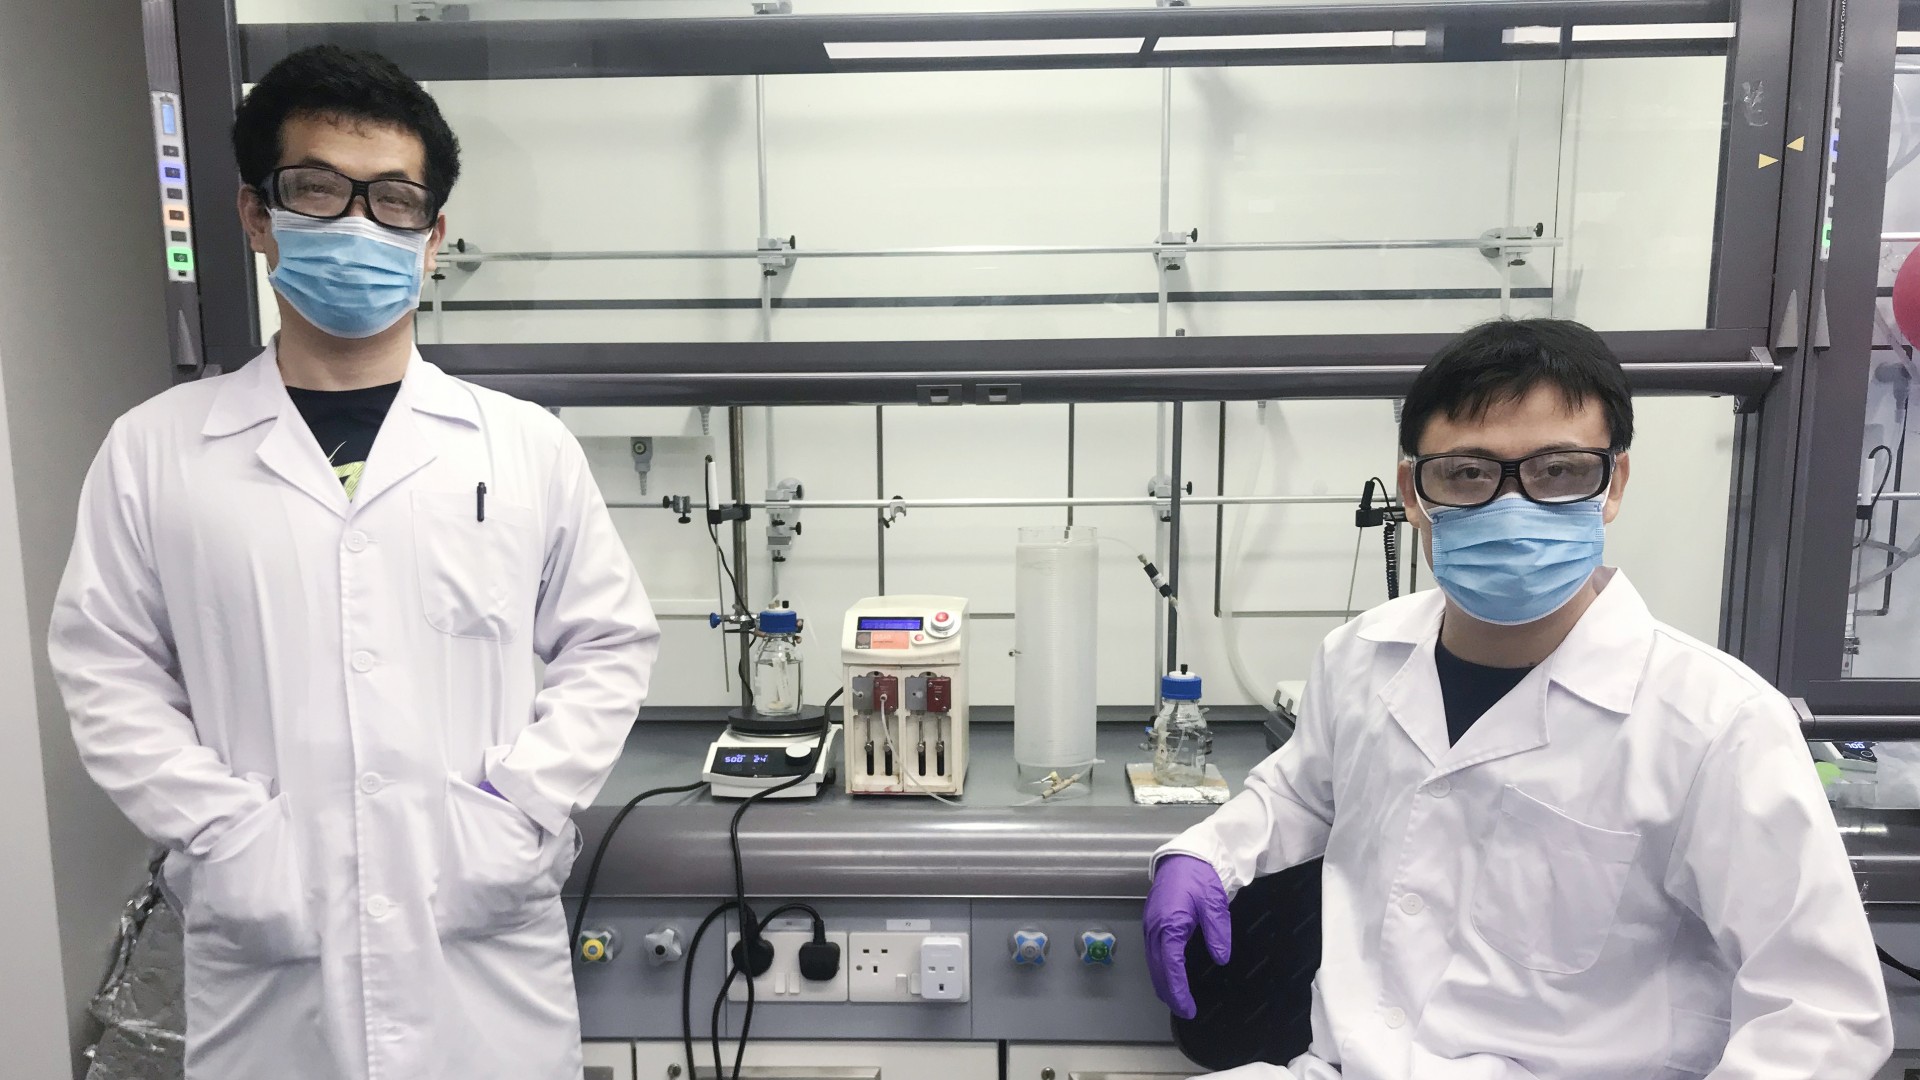 Dr Liu Chenguang (left) and Assistant Professor Wu Jie (right) are part of the NUS team that developed the automated technique.